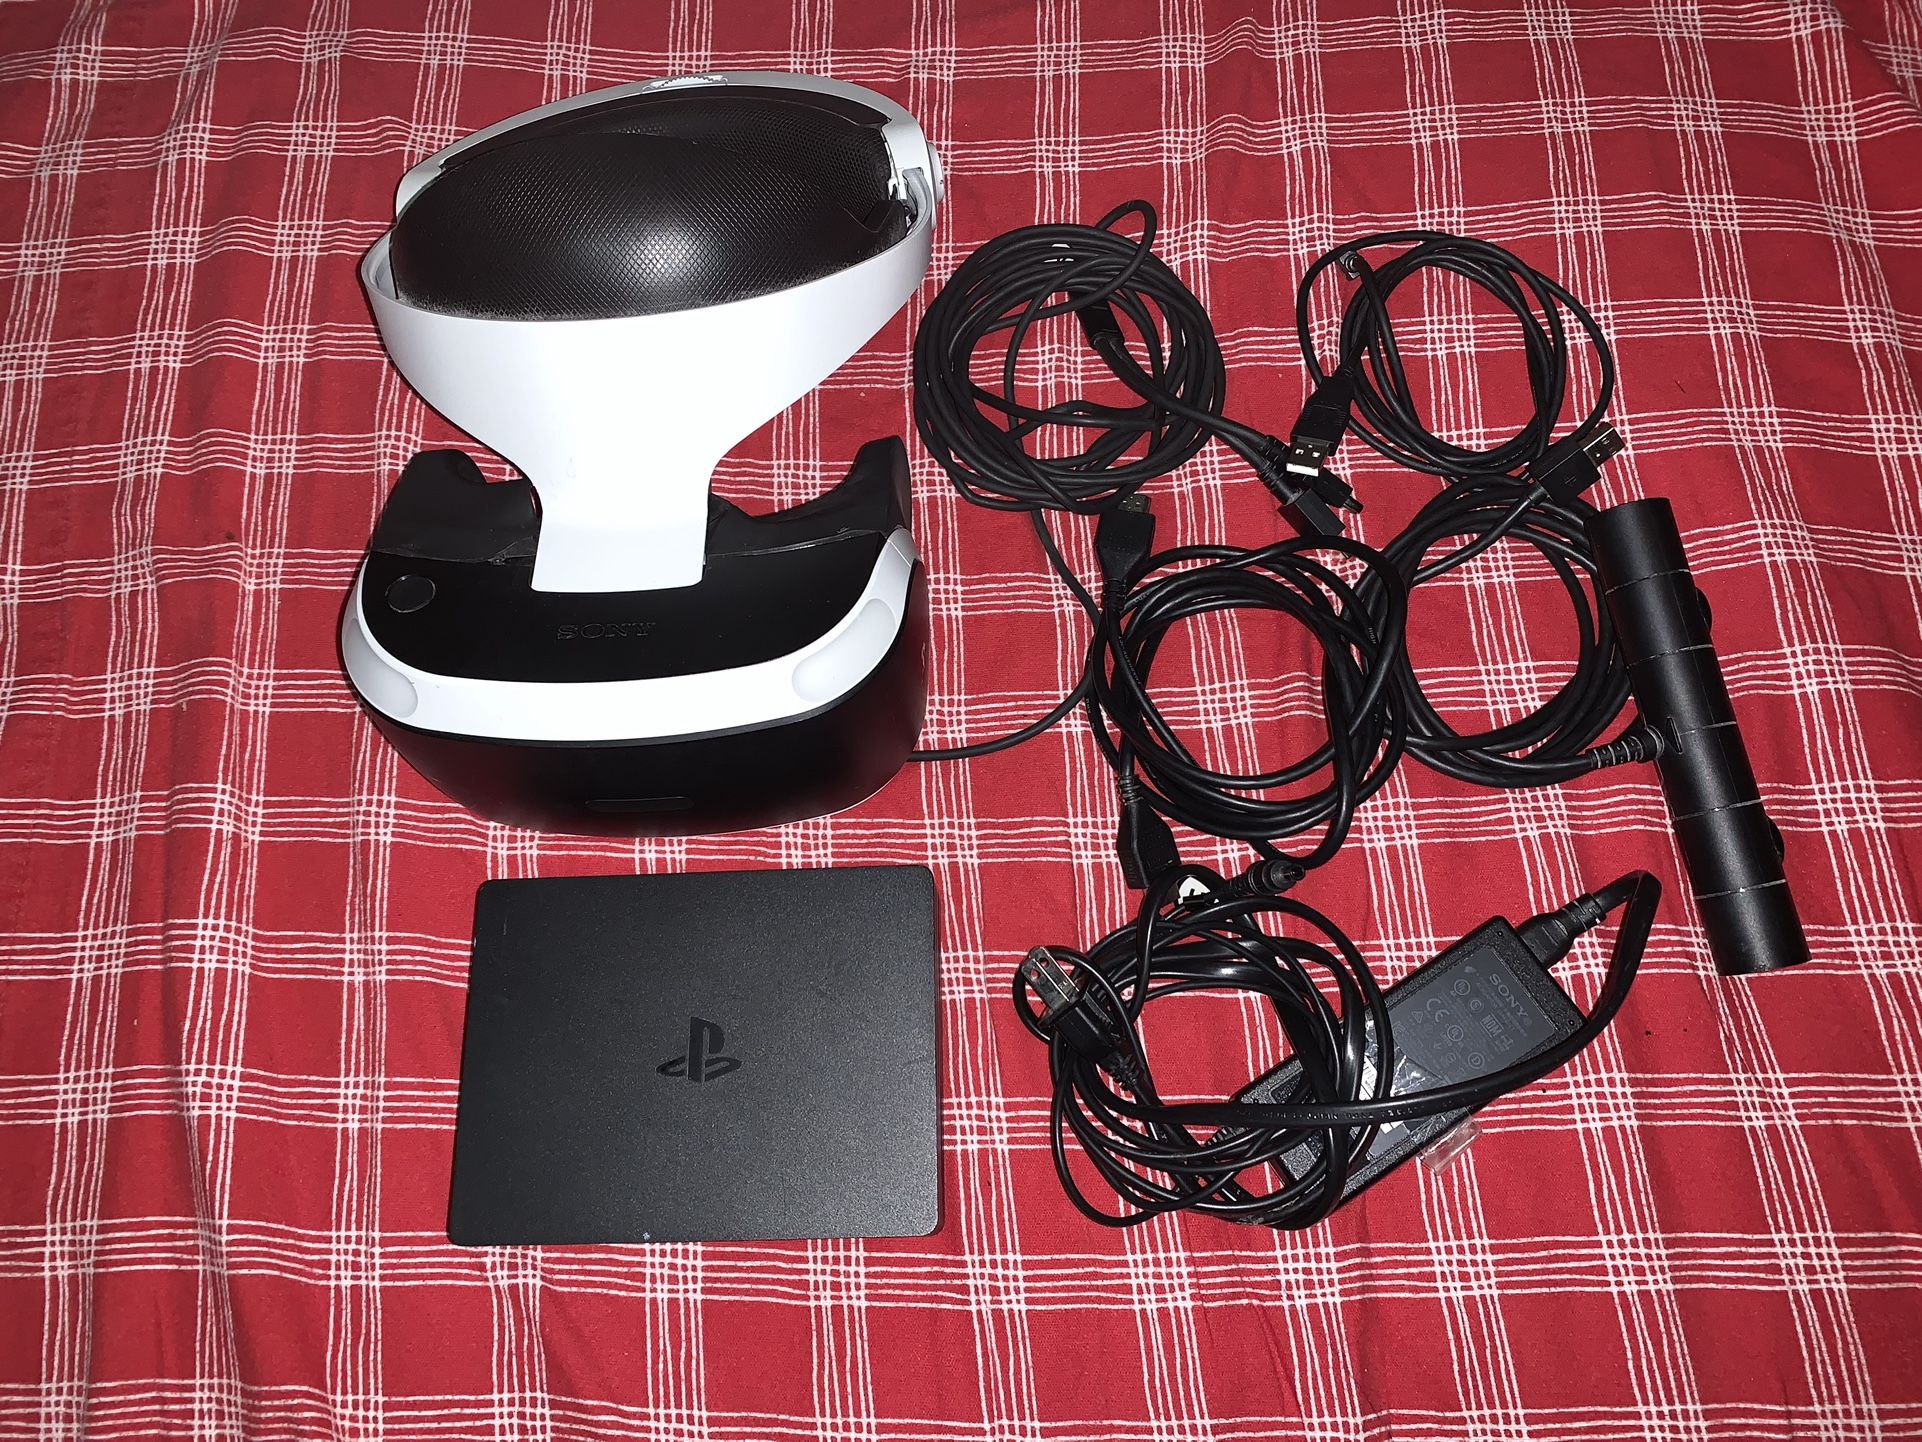 PLAYSTATION 4 VR HEADSET FOR PS4